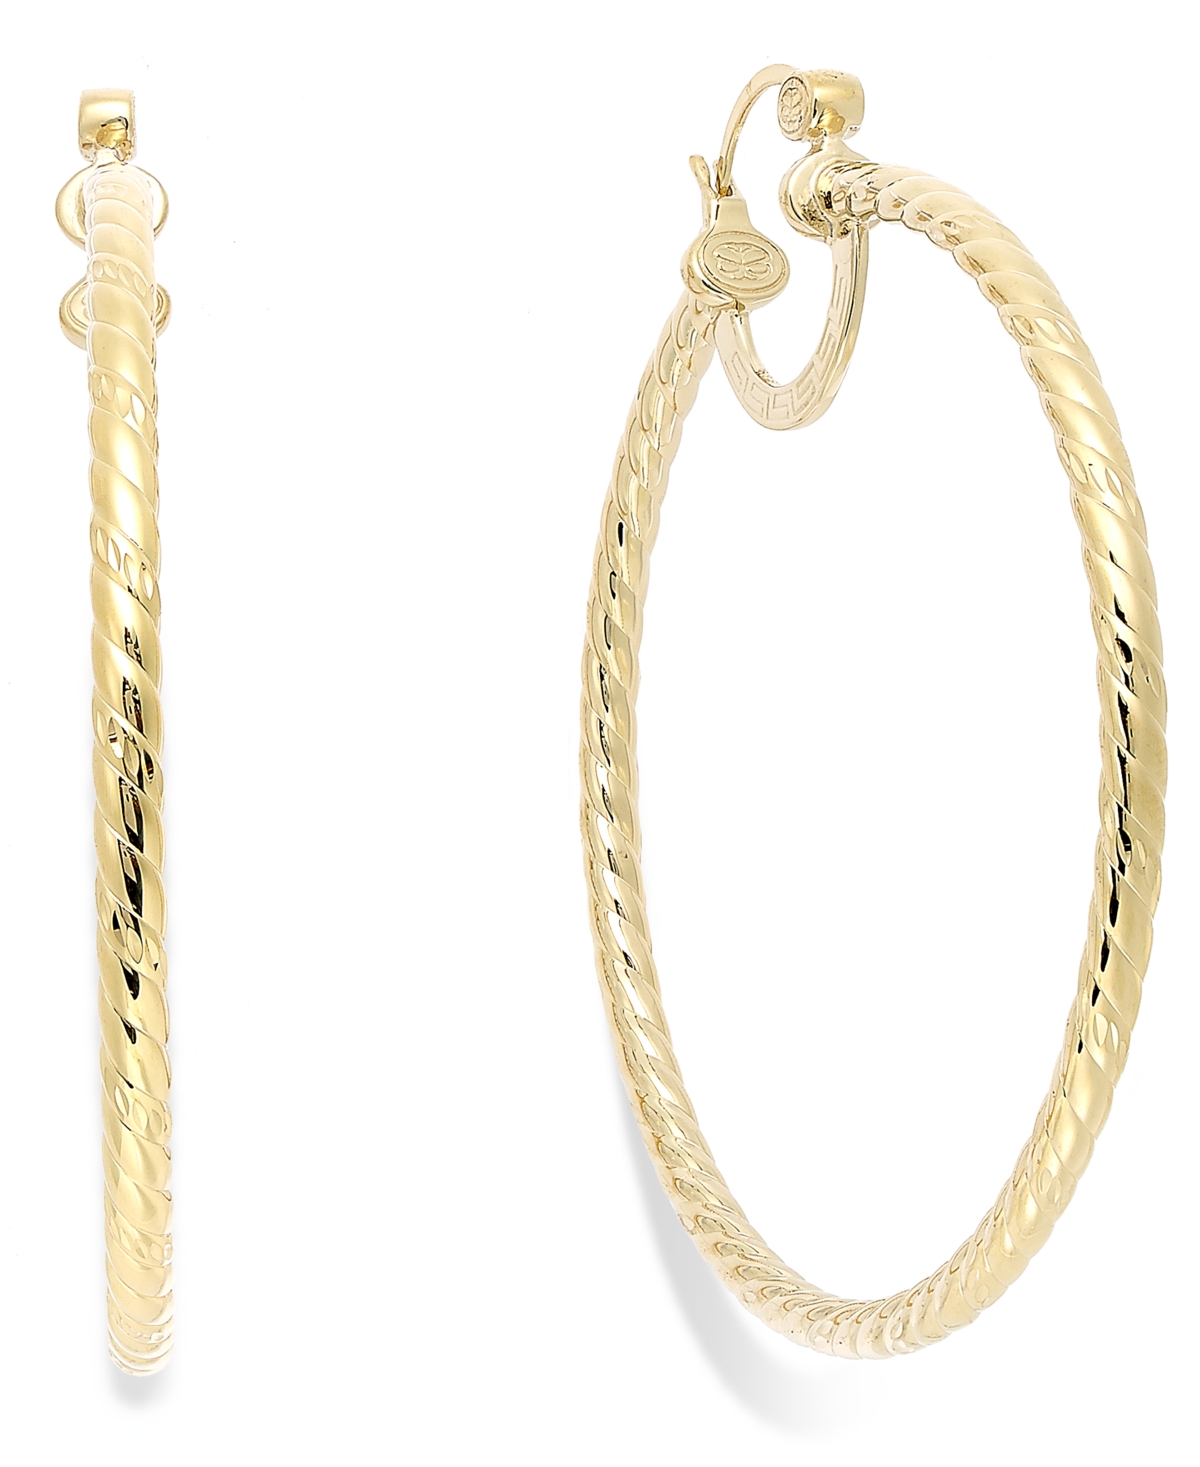 Twisted Large Hoop Earrings in 14k Gold Over Sterling Silver